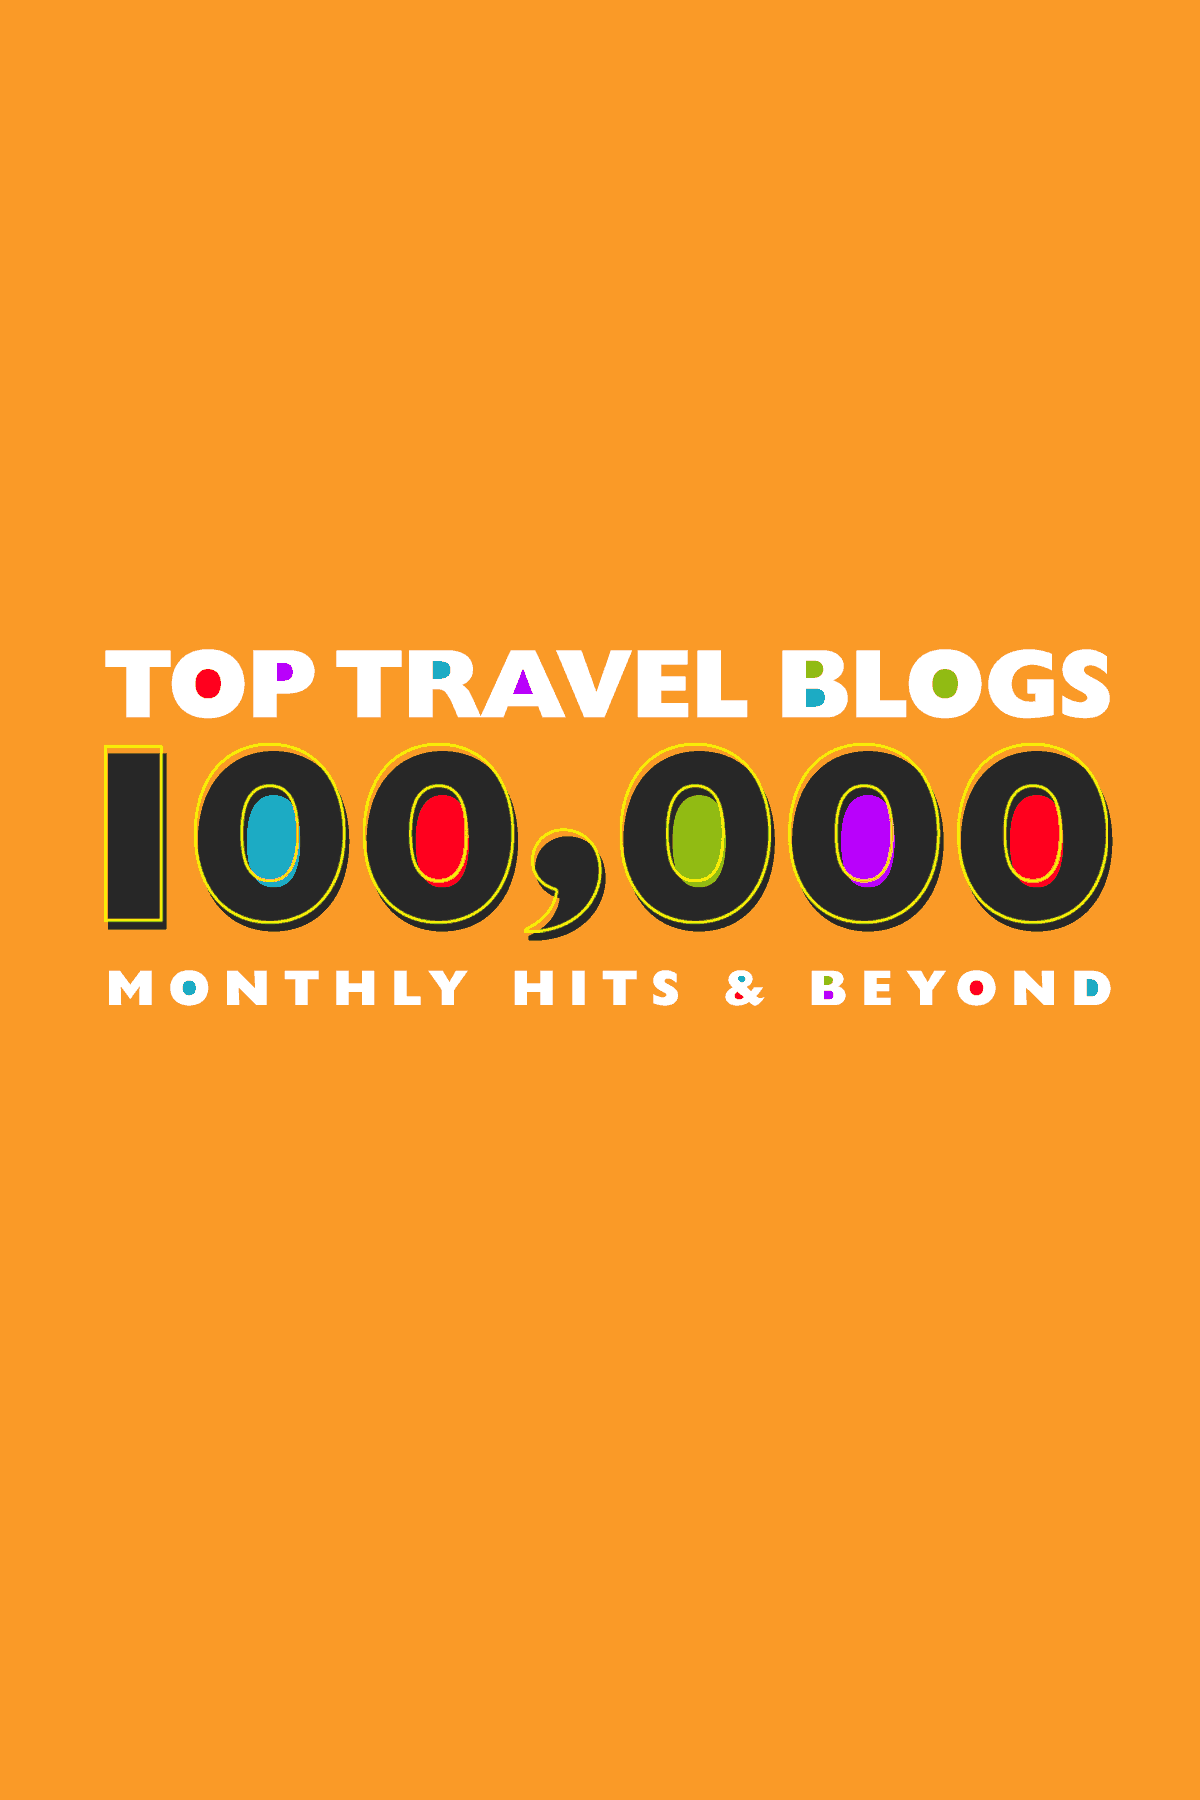 100000 site visits in 1 year